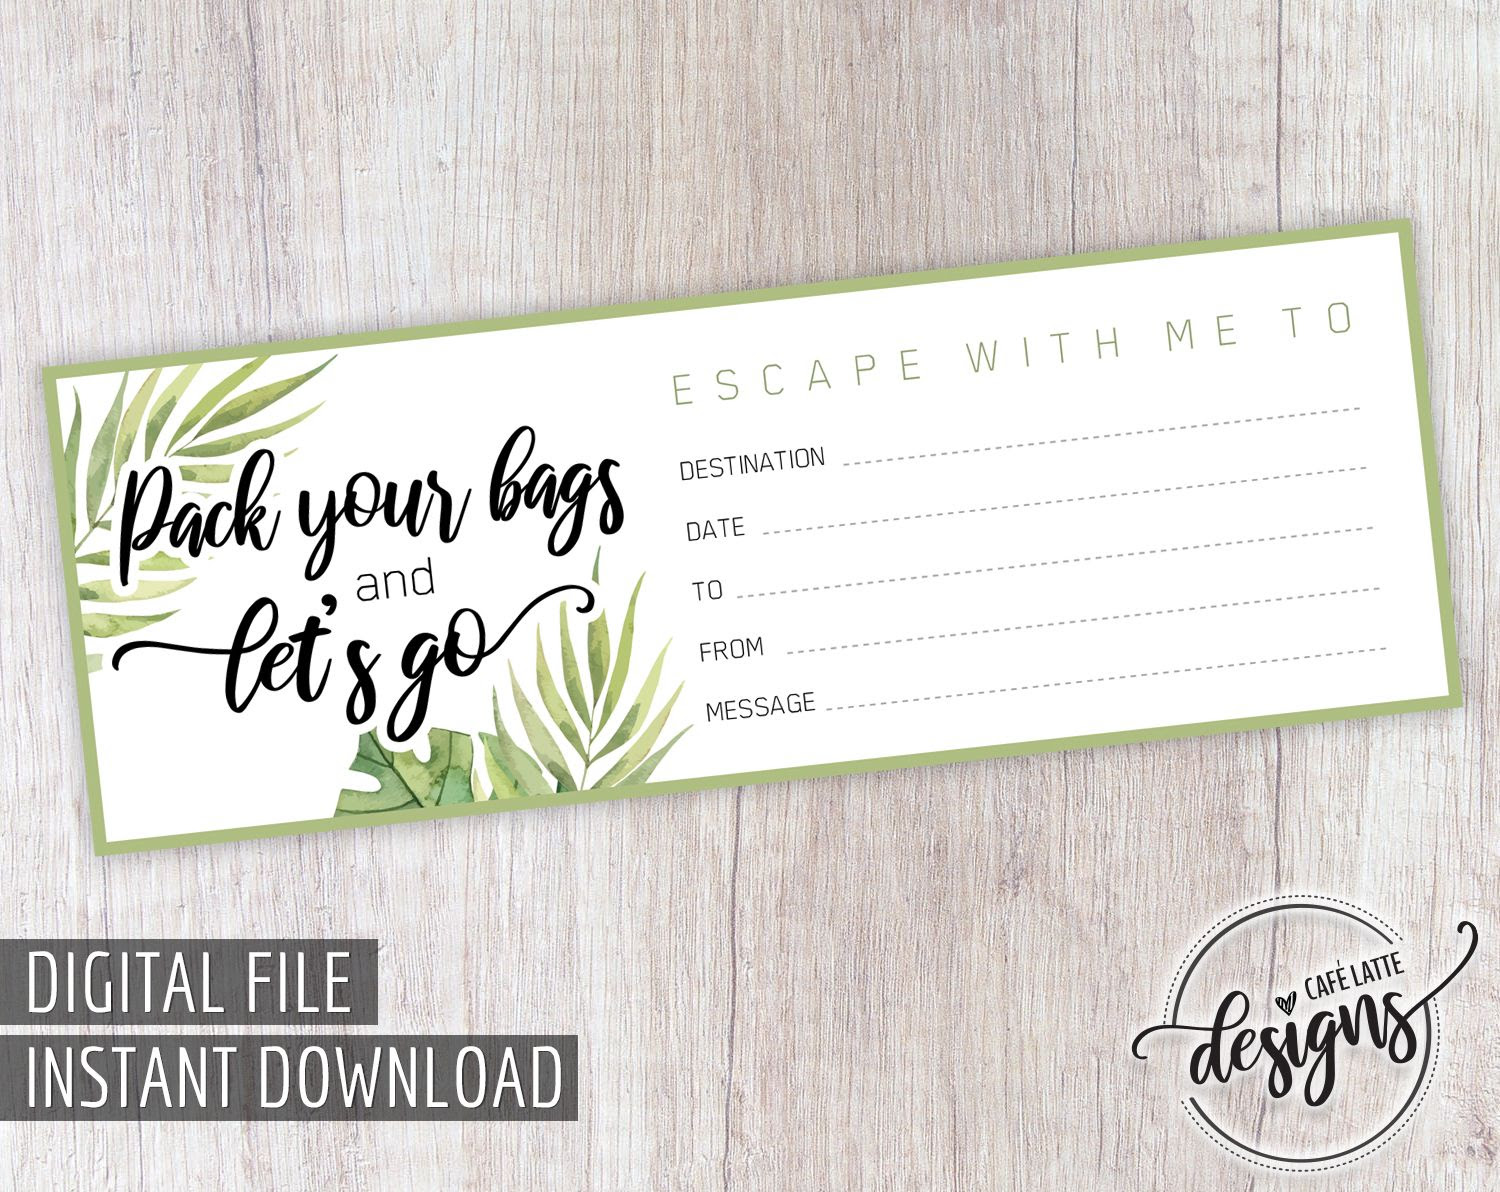 Printable Gift Certificate For Travel / Vacation Gift Certificate